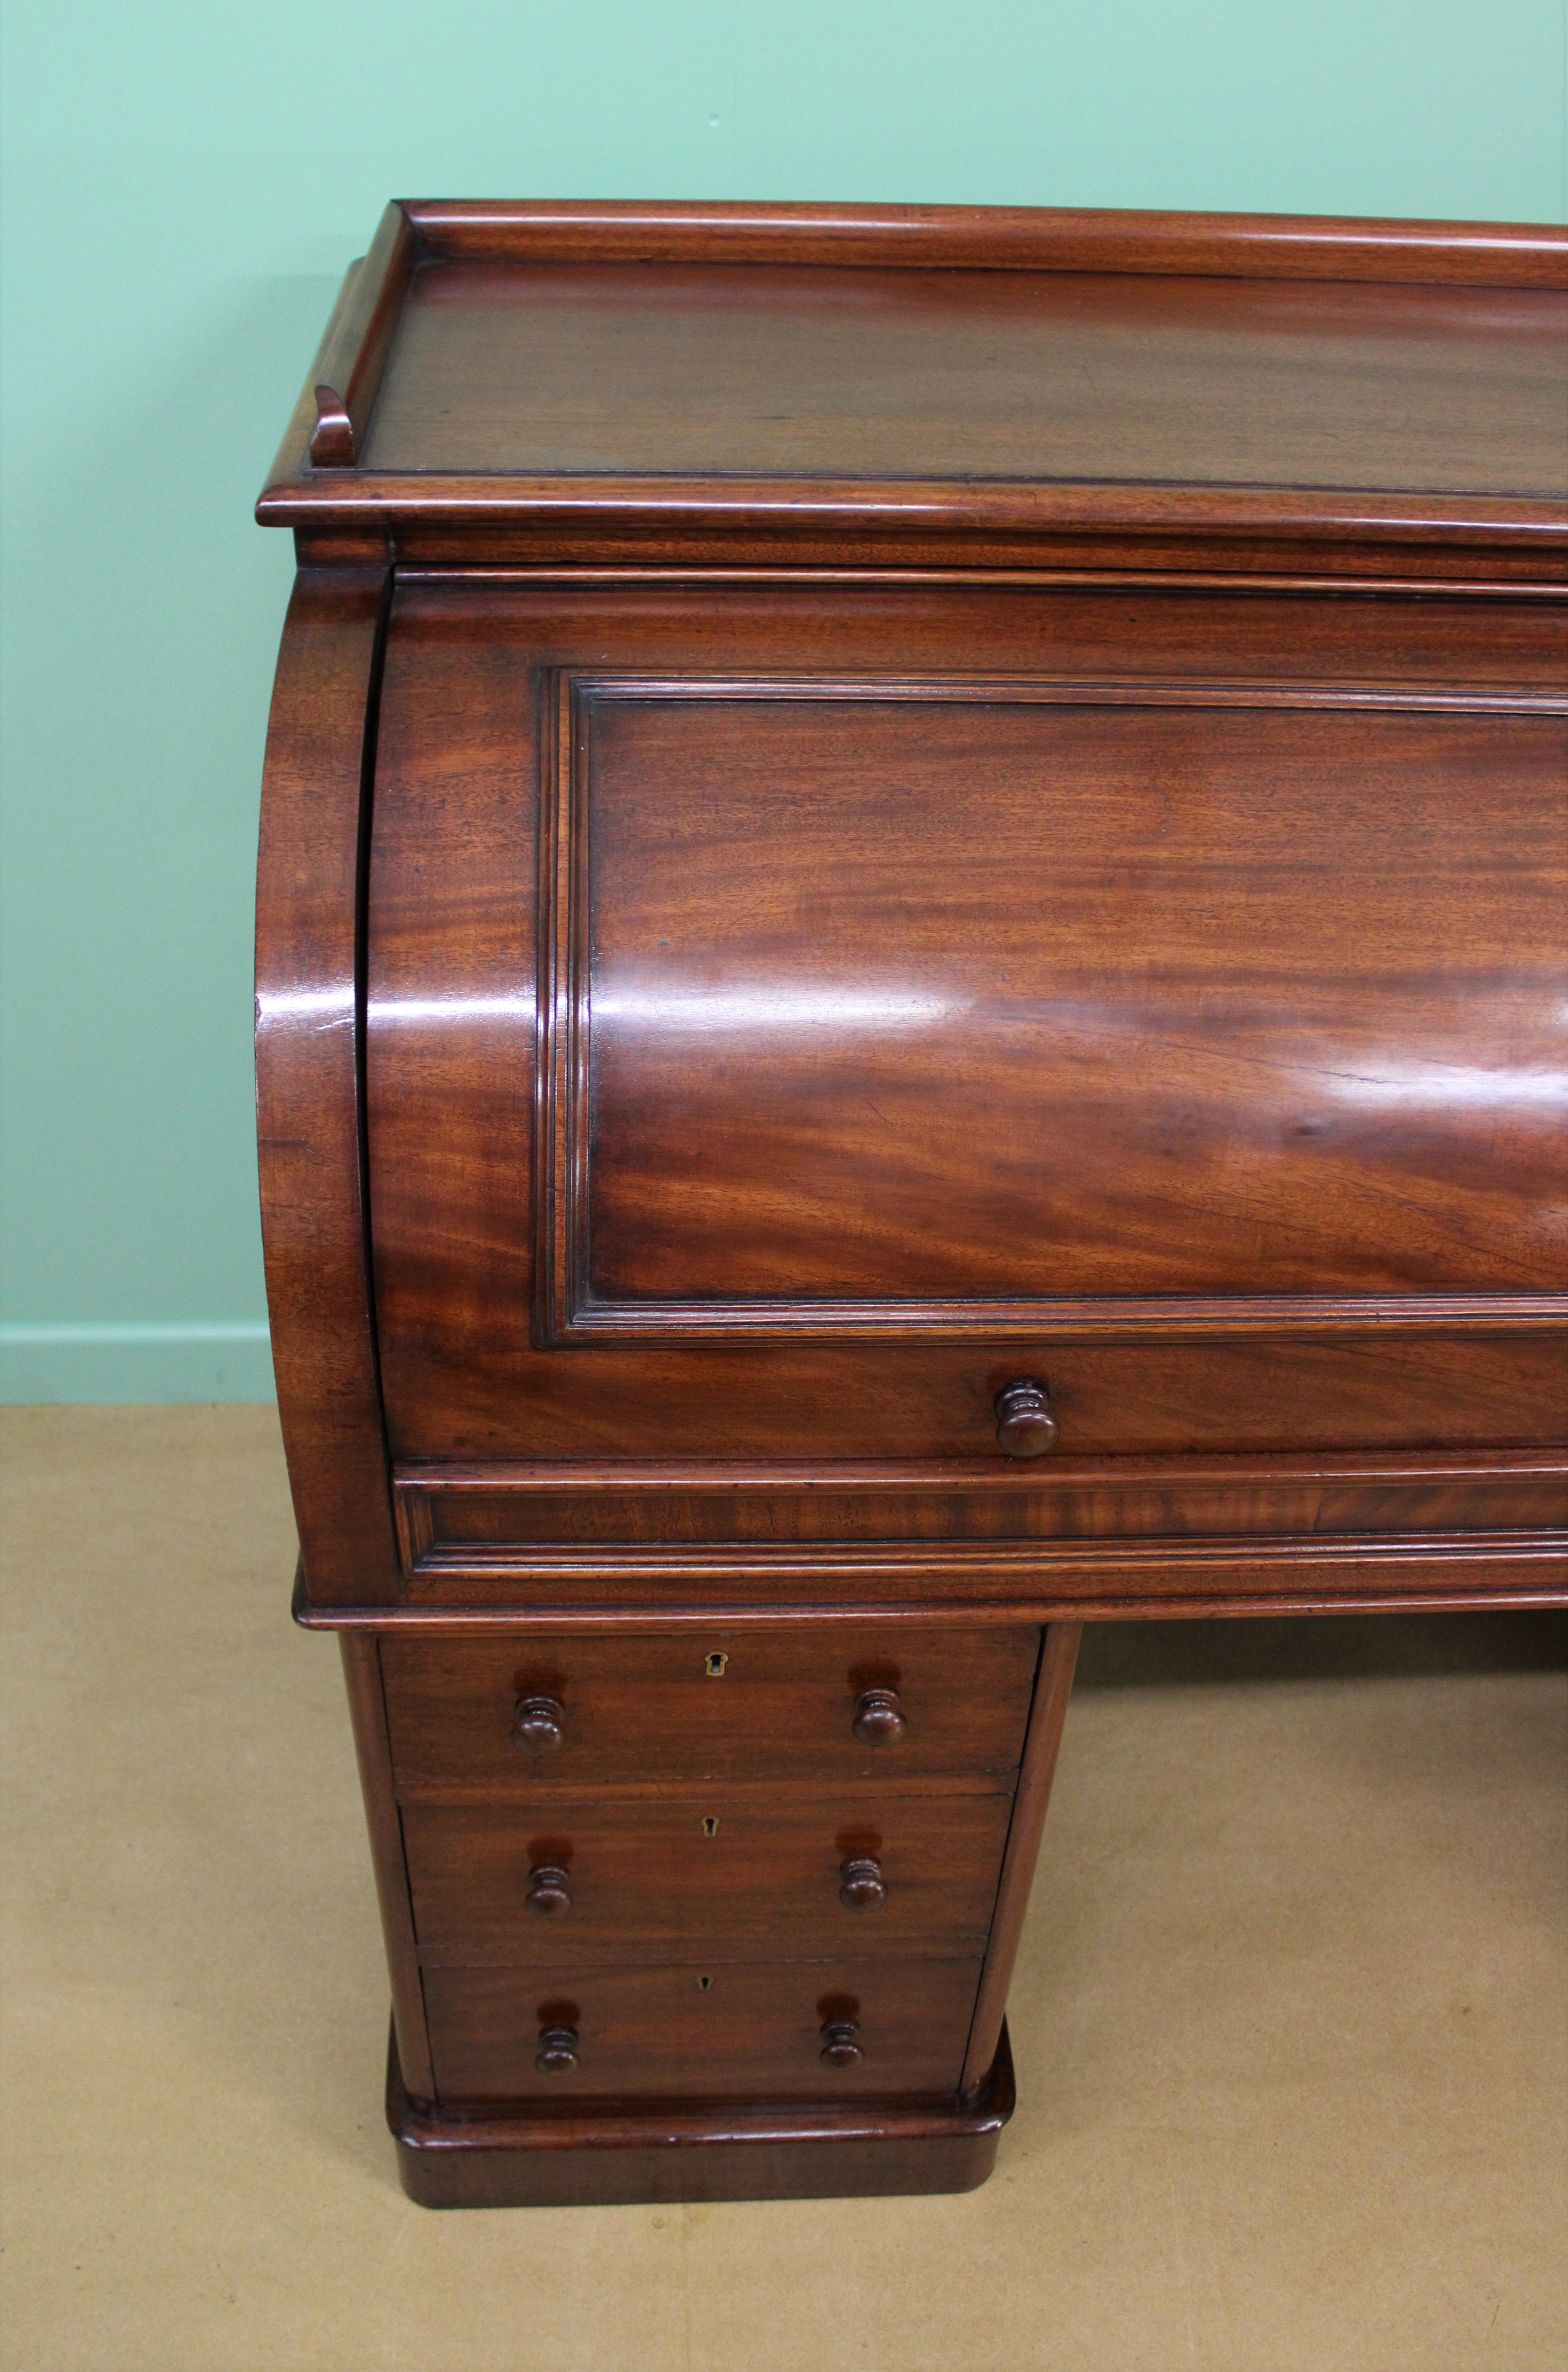 Large Victorian Mahogany Cylinder Desk In Good Condition For Sale In Poling, West Sussex